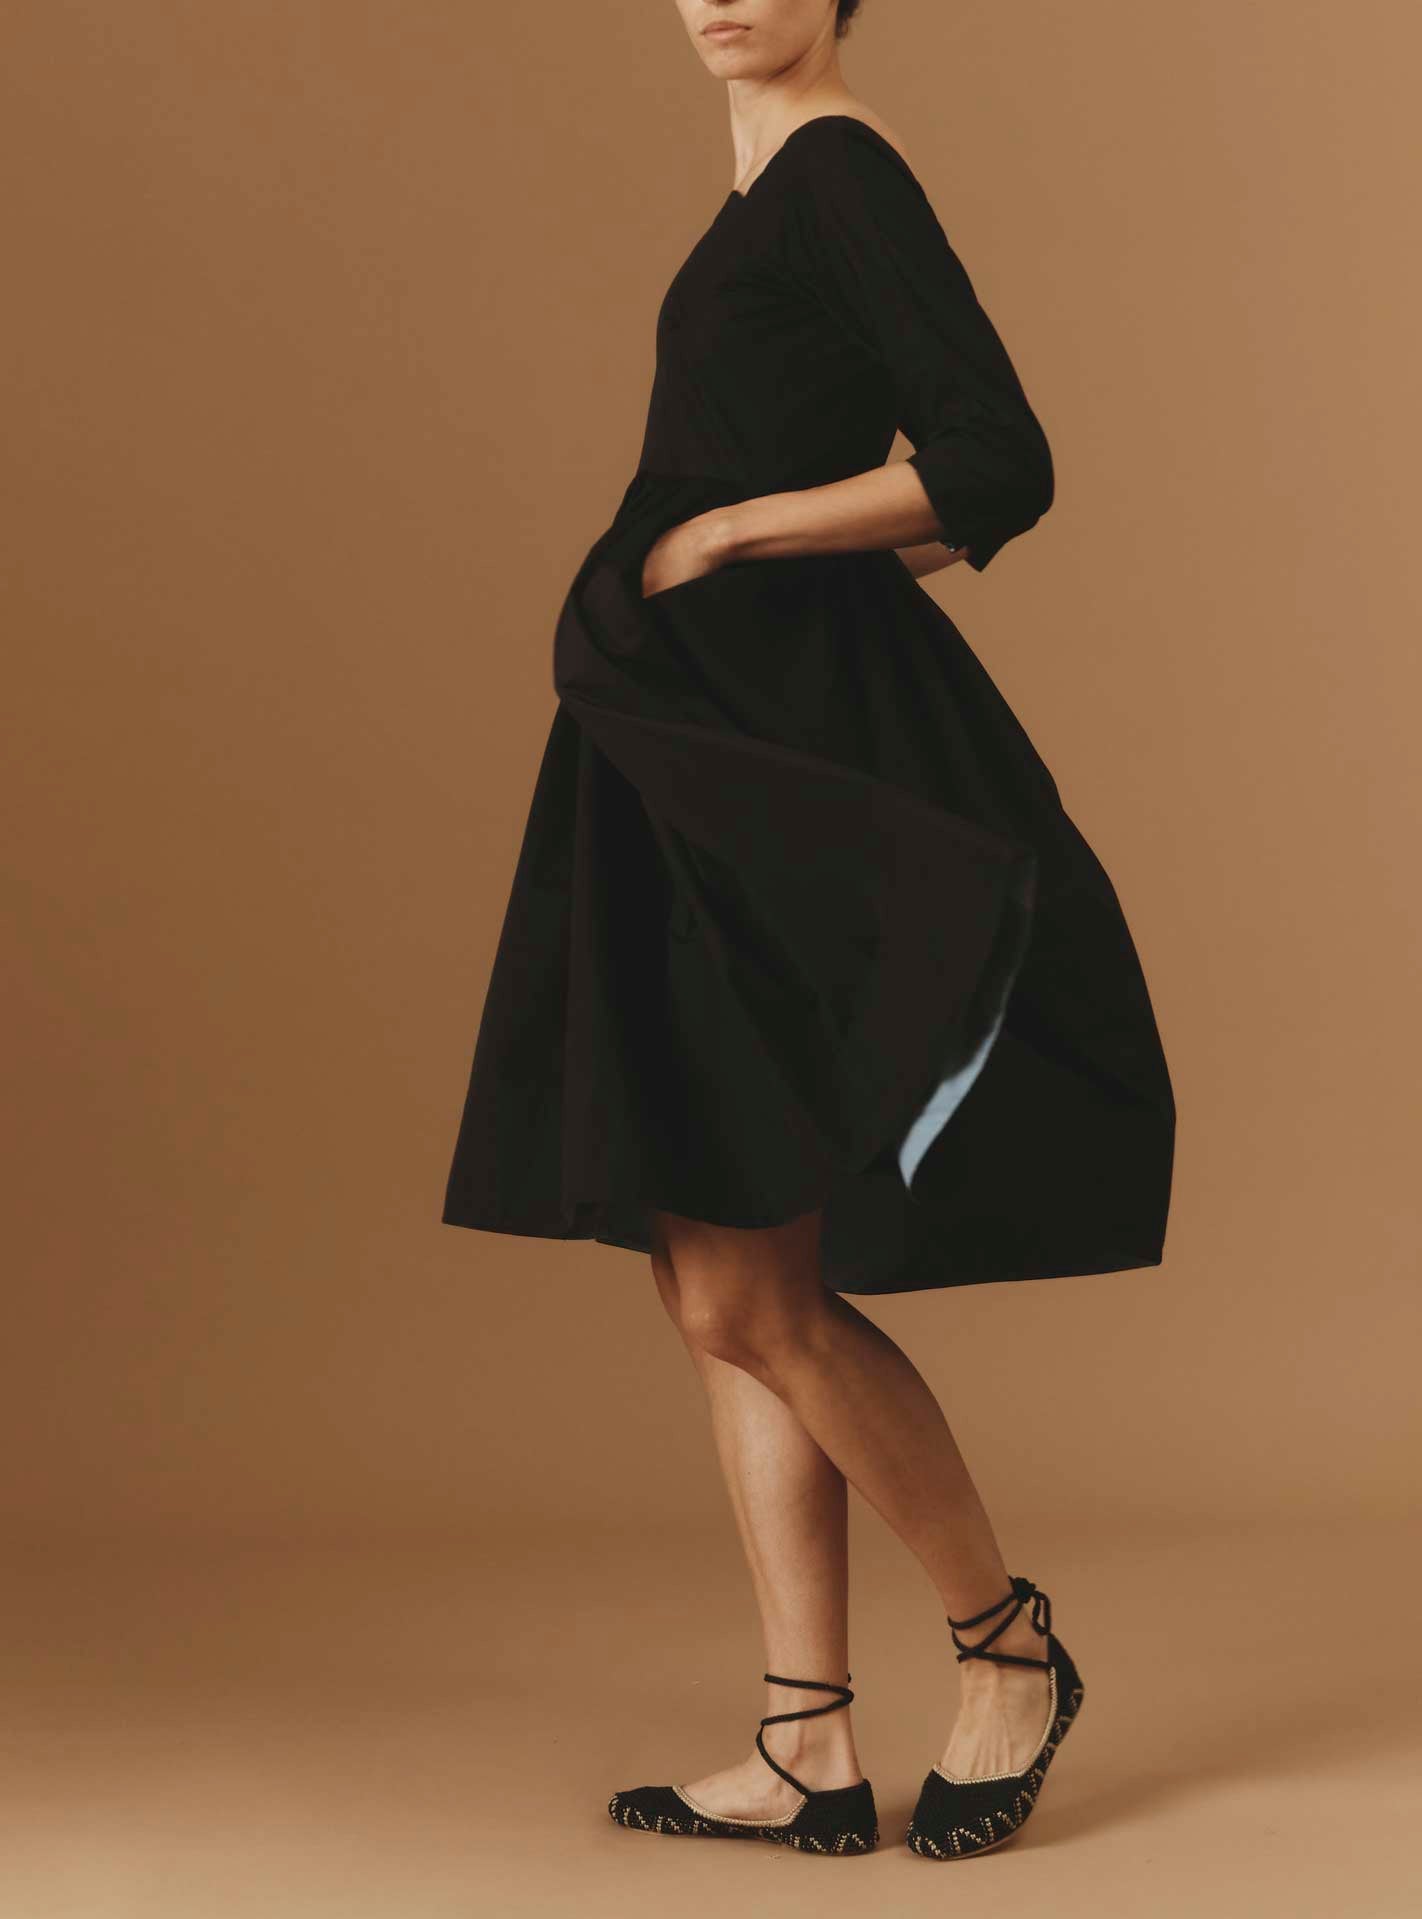 Side view - Amalia Black luxury cotton Dress with pockets by Thierry Colson